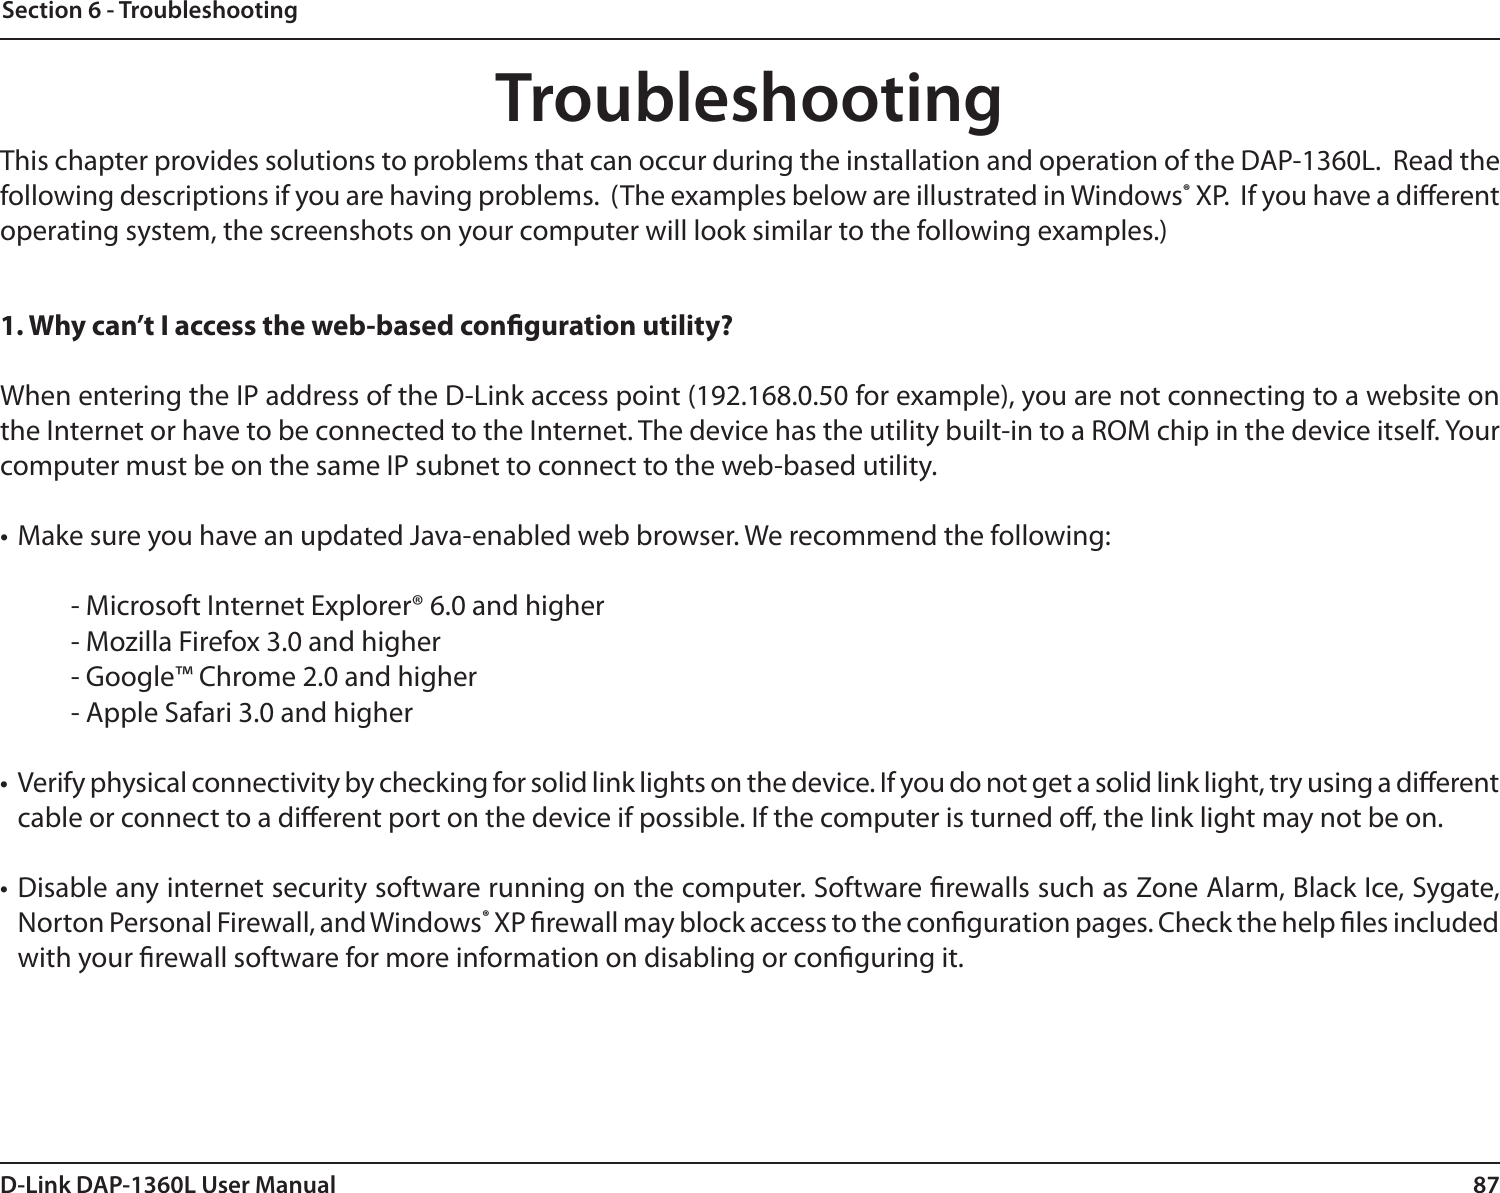 87D-Link DAP-1360L User ManualSection 6 - TroubleshootingTroubleshootingThis chapter provides solutions to problems that can occur during the installation and operation of the DAP-1360L.  Read the following descriptions if you are having problems.  (The examples below are illustrated in Windows® XP.  If you have a dierent operating system, the screenshots on your computer will look similar to the following examples.)1. Why can’t I access the web-based conguration utility?When entering the IP address of the D-Link access point (192.168.0.50 for example), you are not connecting to a website on the Internet or have to be connected to the Internet. The device has the utility built-in to a ROM chip in the device itself. Your computer must be on the same IP subnet to connect to the web-based utility. • Make sure you have an updated Java-enabled web browser. We recommend the following: - Microsoft Internet Explorer® 6.0 and higher- Mozilla Firefox 3.0 and higher- Google™ Chrome 2.0 and higher- Apple Safari 3.0 and higher• Verify physical connectivity by checking for solid link lights on the device. If you do not get a solid link light, try using a dierent cable or connect to a dierent port on the device if possible. If the computer is turned o, the link light may not be on.• Disable any internet security software running on the computer. Software rewalls such as Zone Alarm, Black Ice, Sygate, Norton Personal Firewall, and Windows® XP rewall may block access to the conguration pages. Check the help les included with your rewall software for more information on disabling or conguring it.